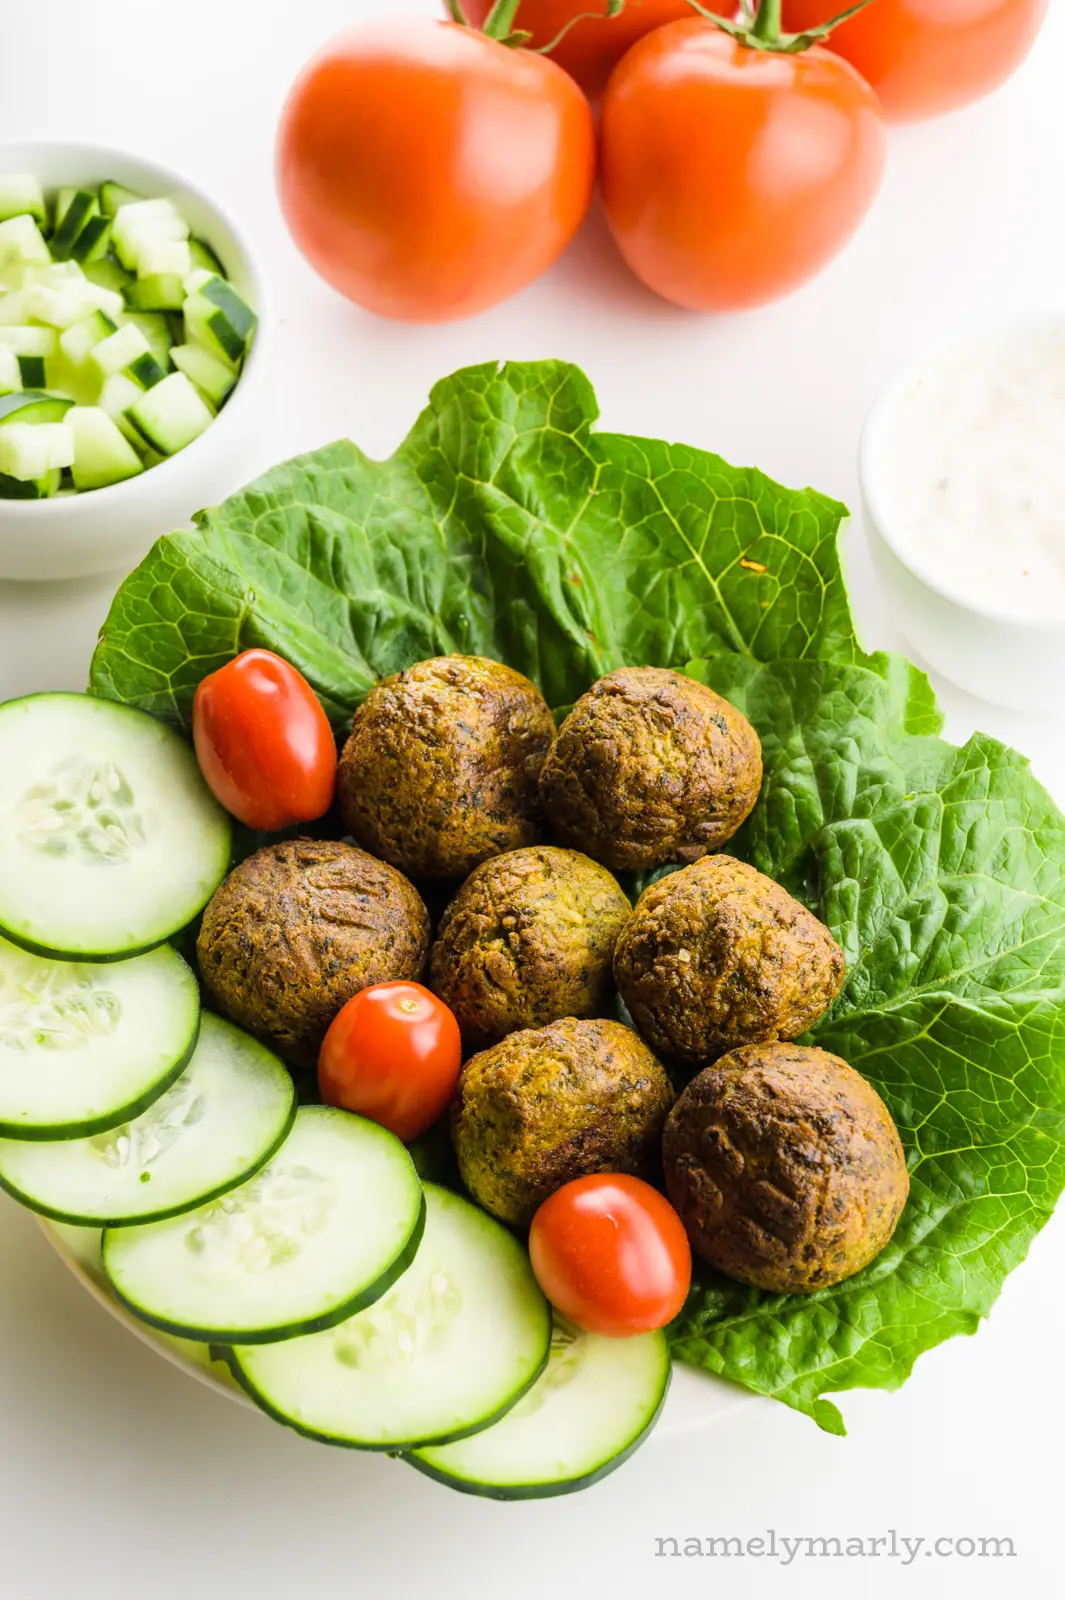 Air Fryer Falafels sit on a plate with veggies, such as lettuce and cucumbers. A bowl of sliced cucumbers is behind it along with a group of tomatoes.